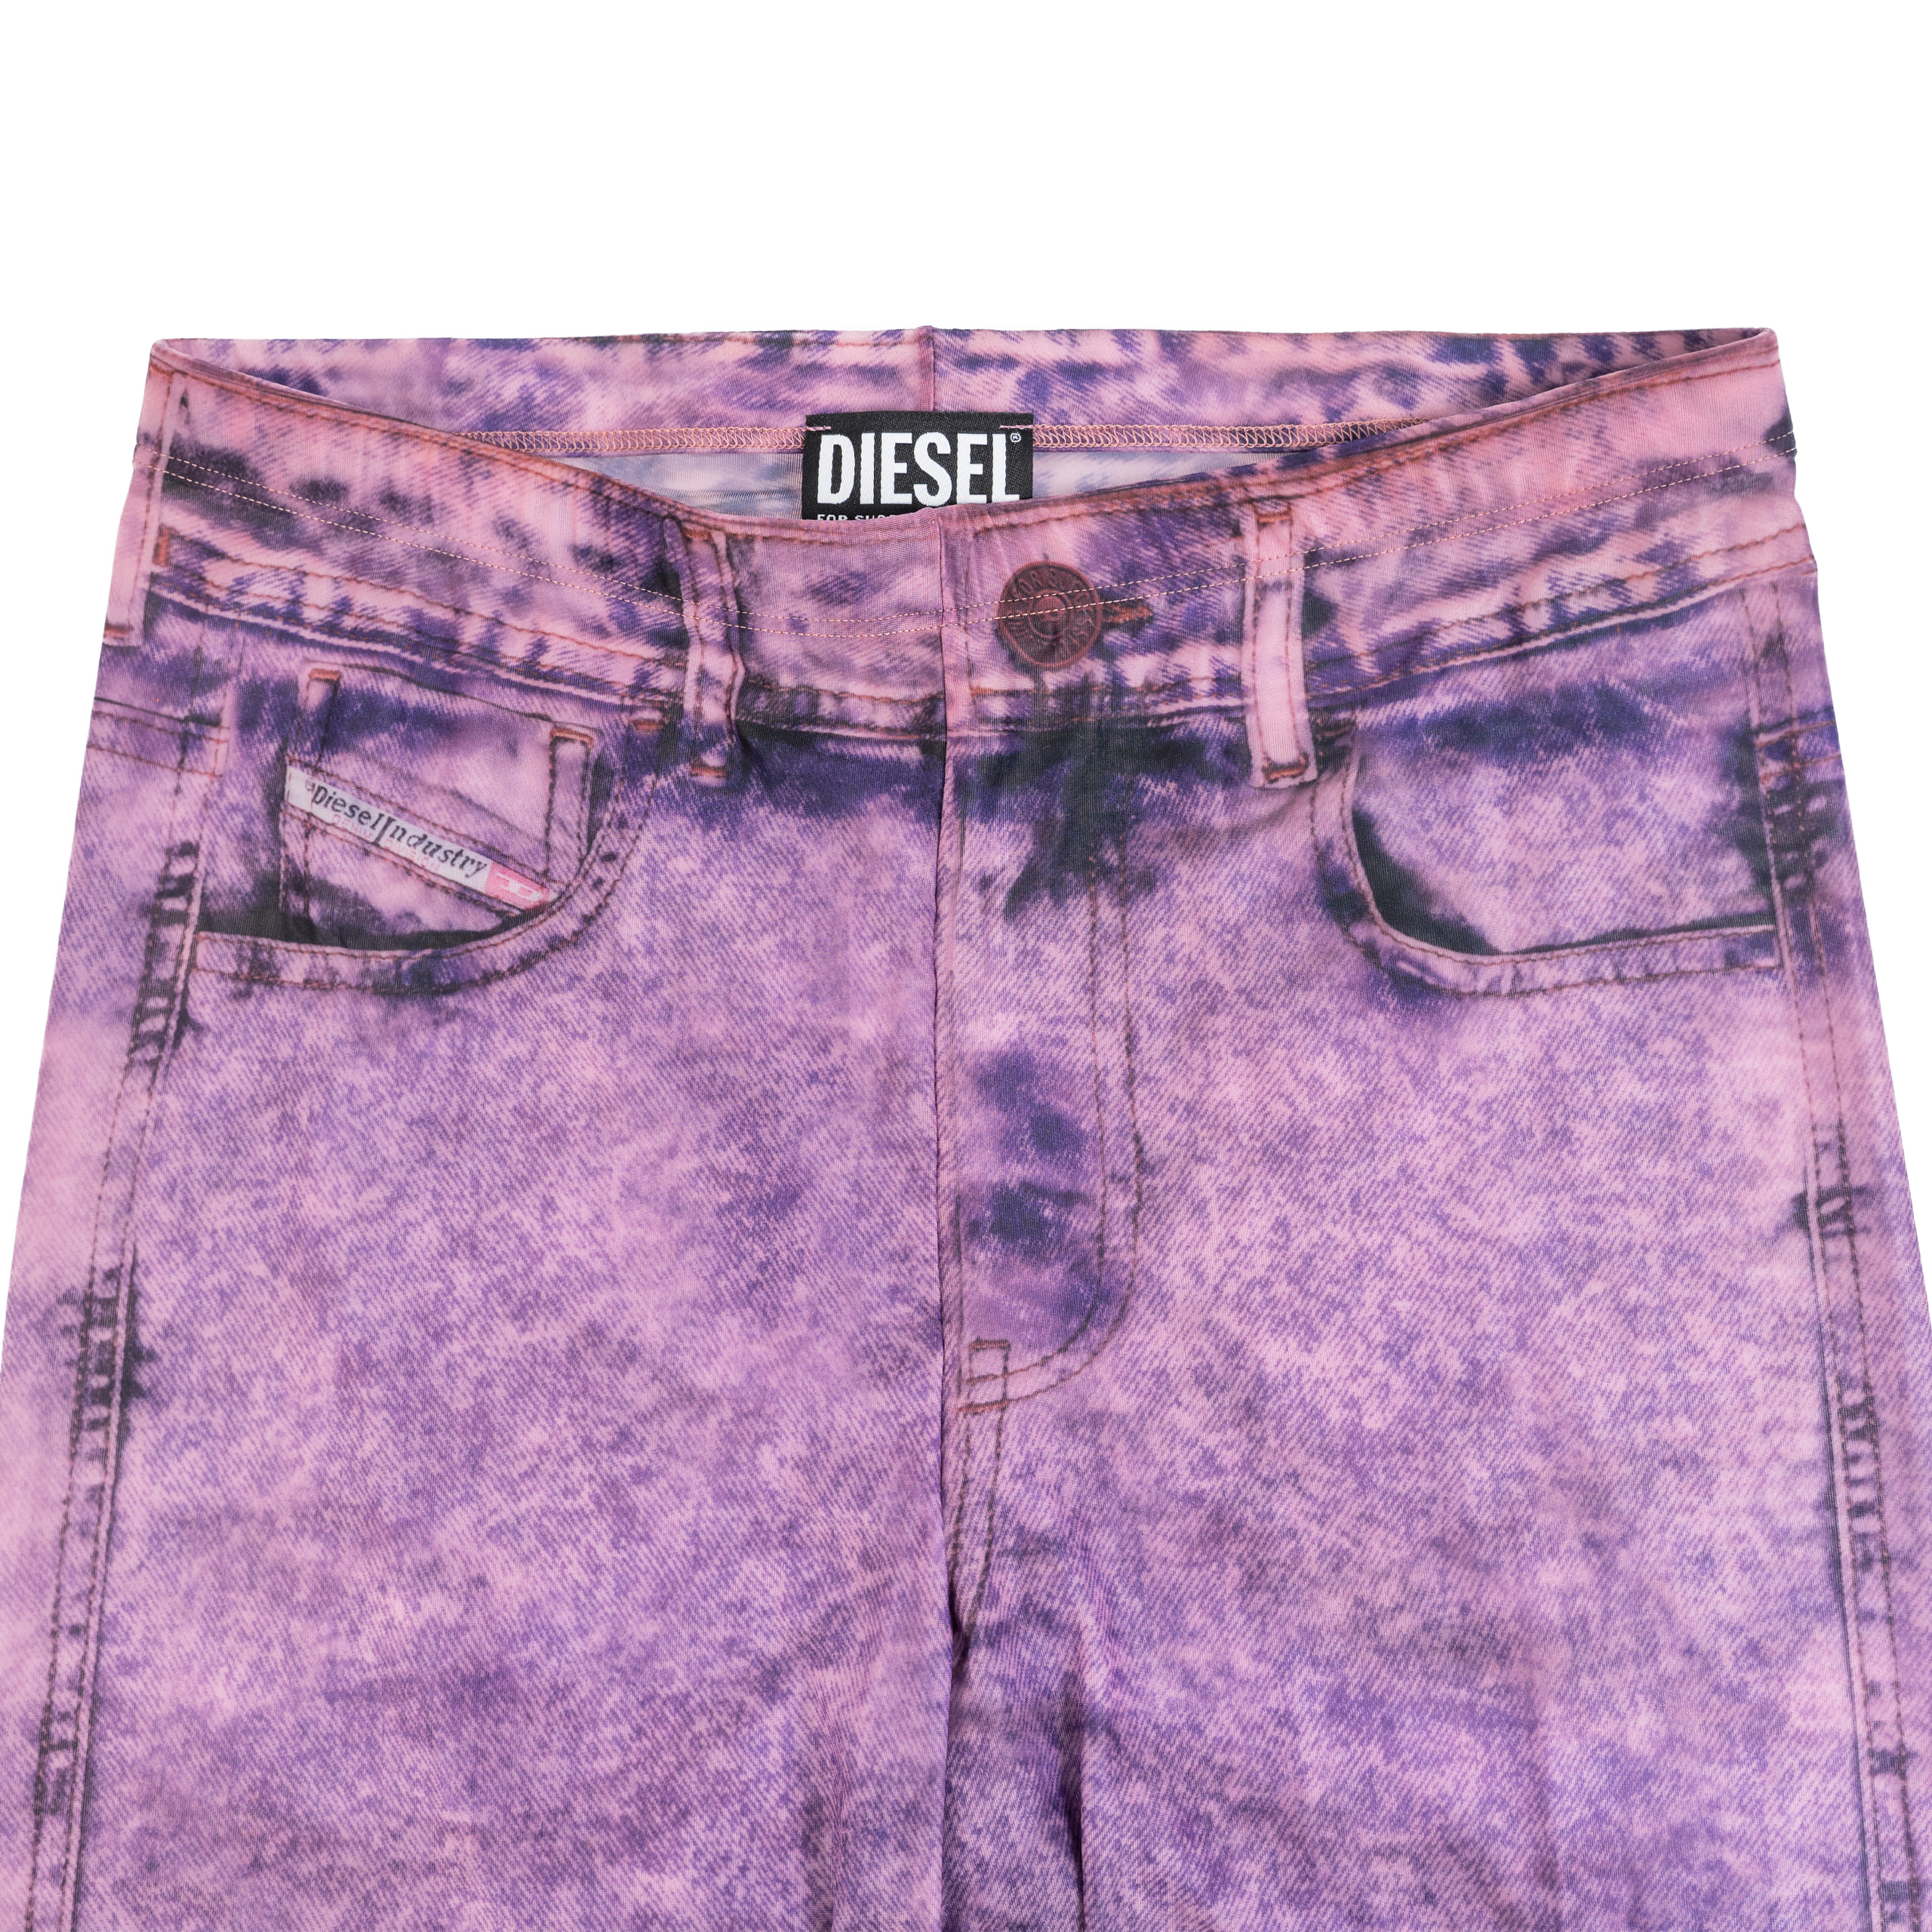 Buy Diesel women blue graphic printed p-koll-d1 tights for $113 online on  SV77, A059030EIAJ141A